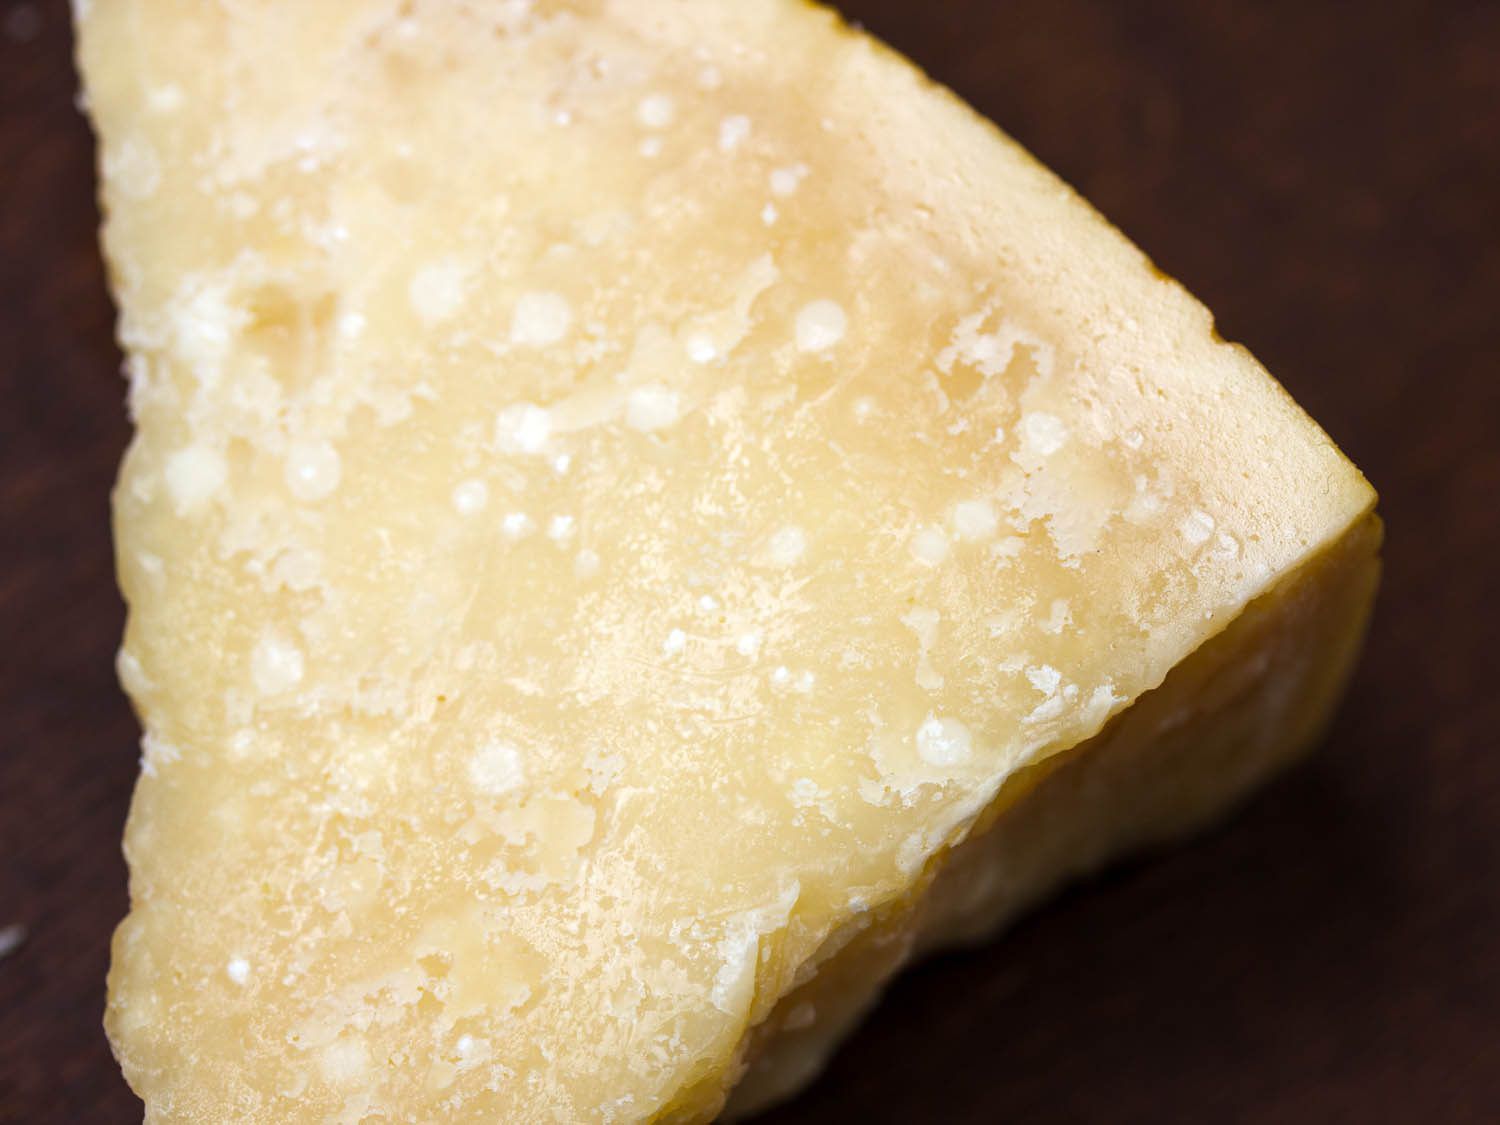 A piece of Parmesan cheese with crystals of protein visible.